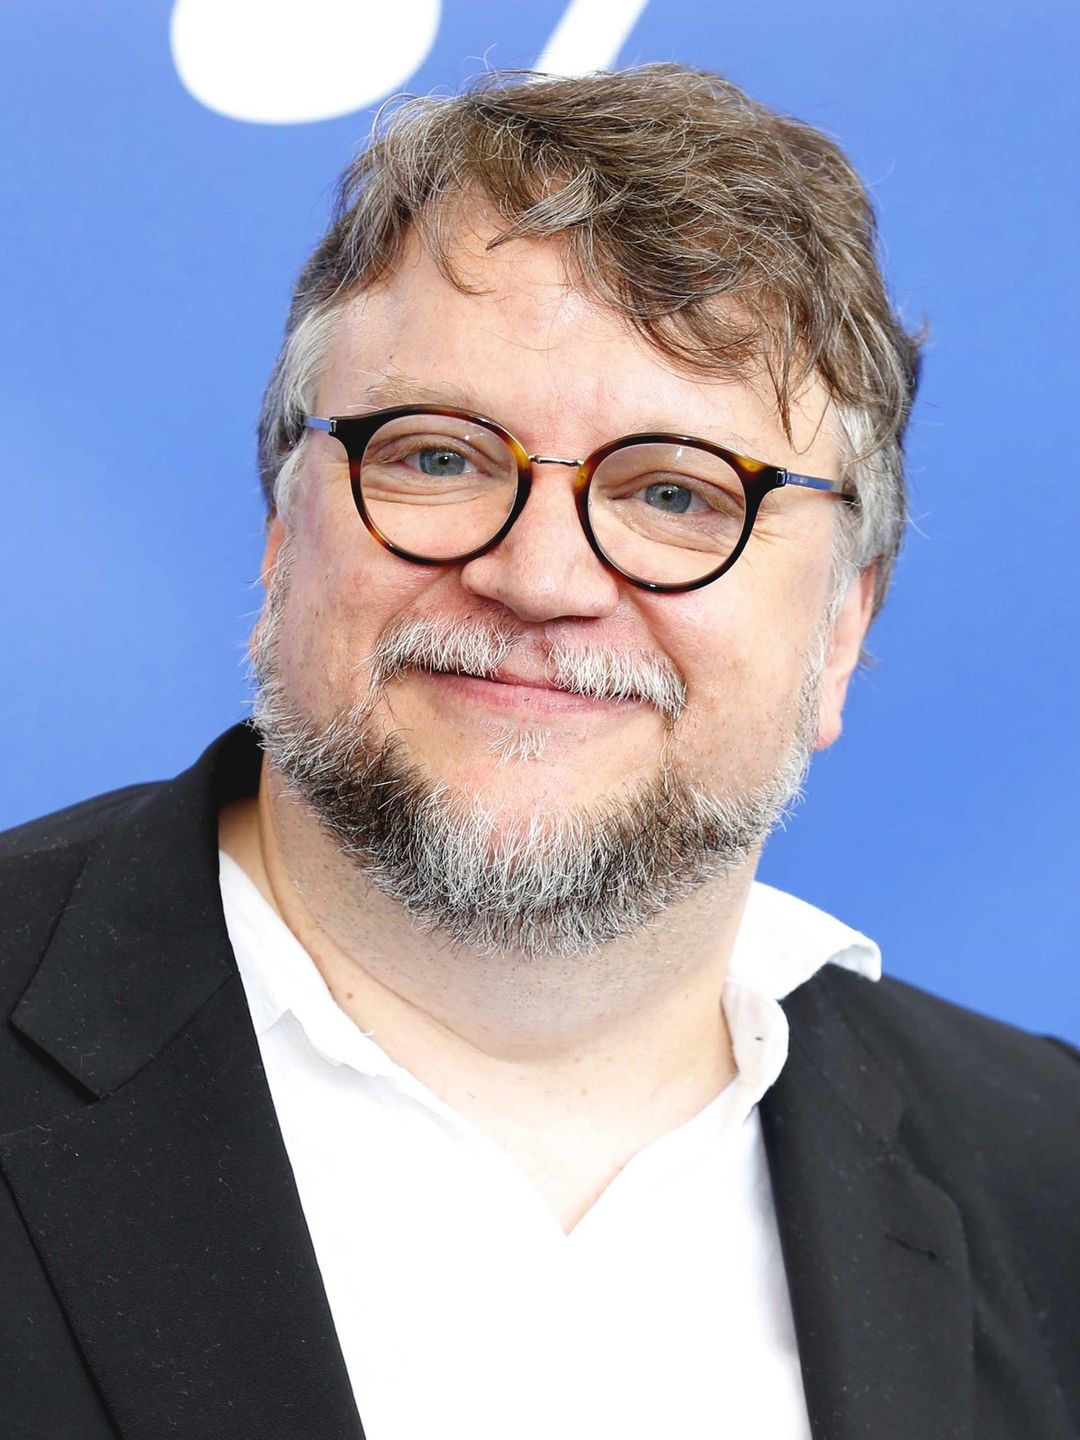 Guillermo del Toro way to fame